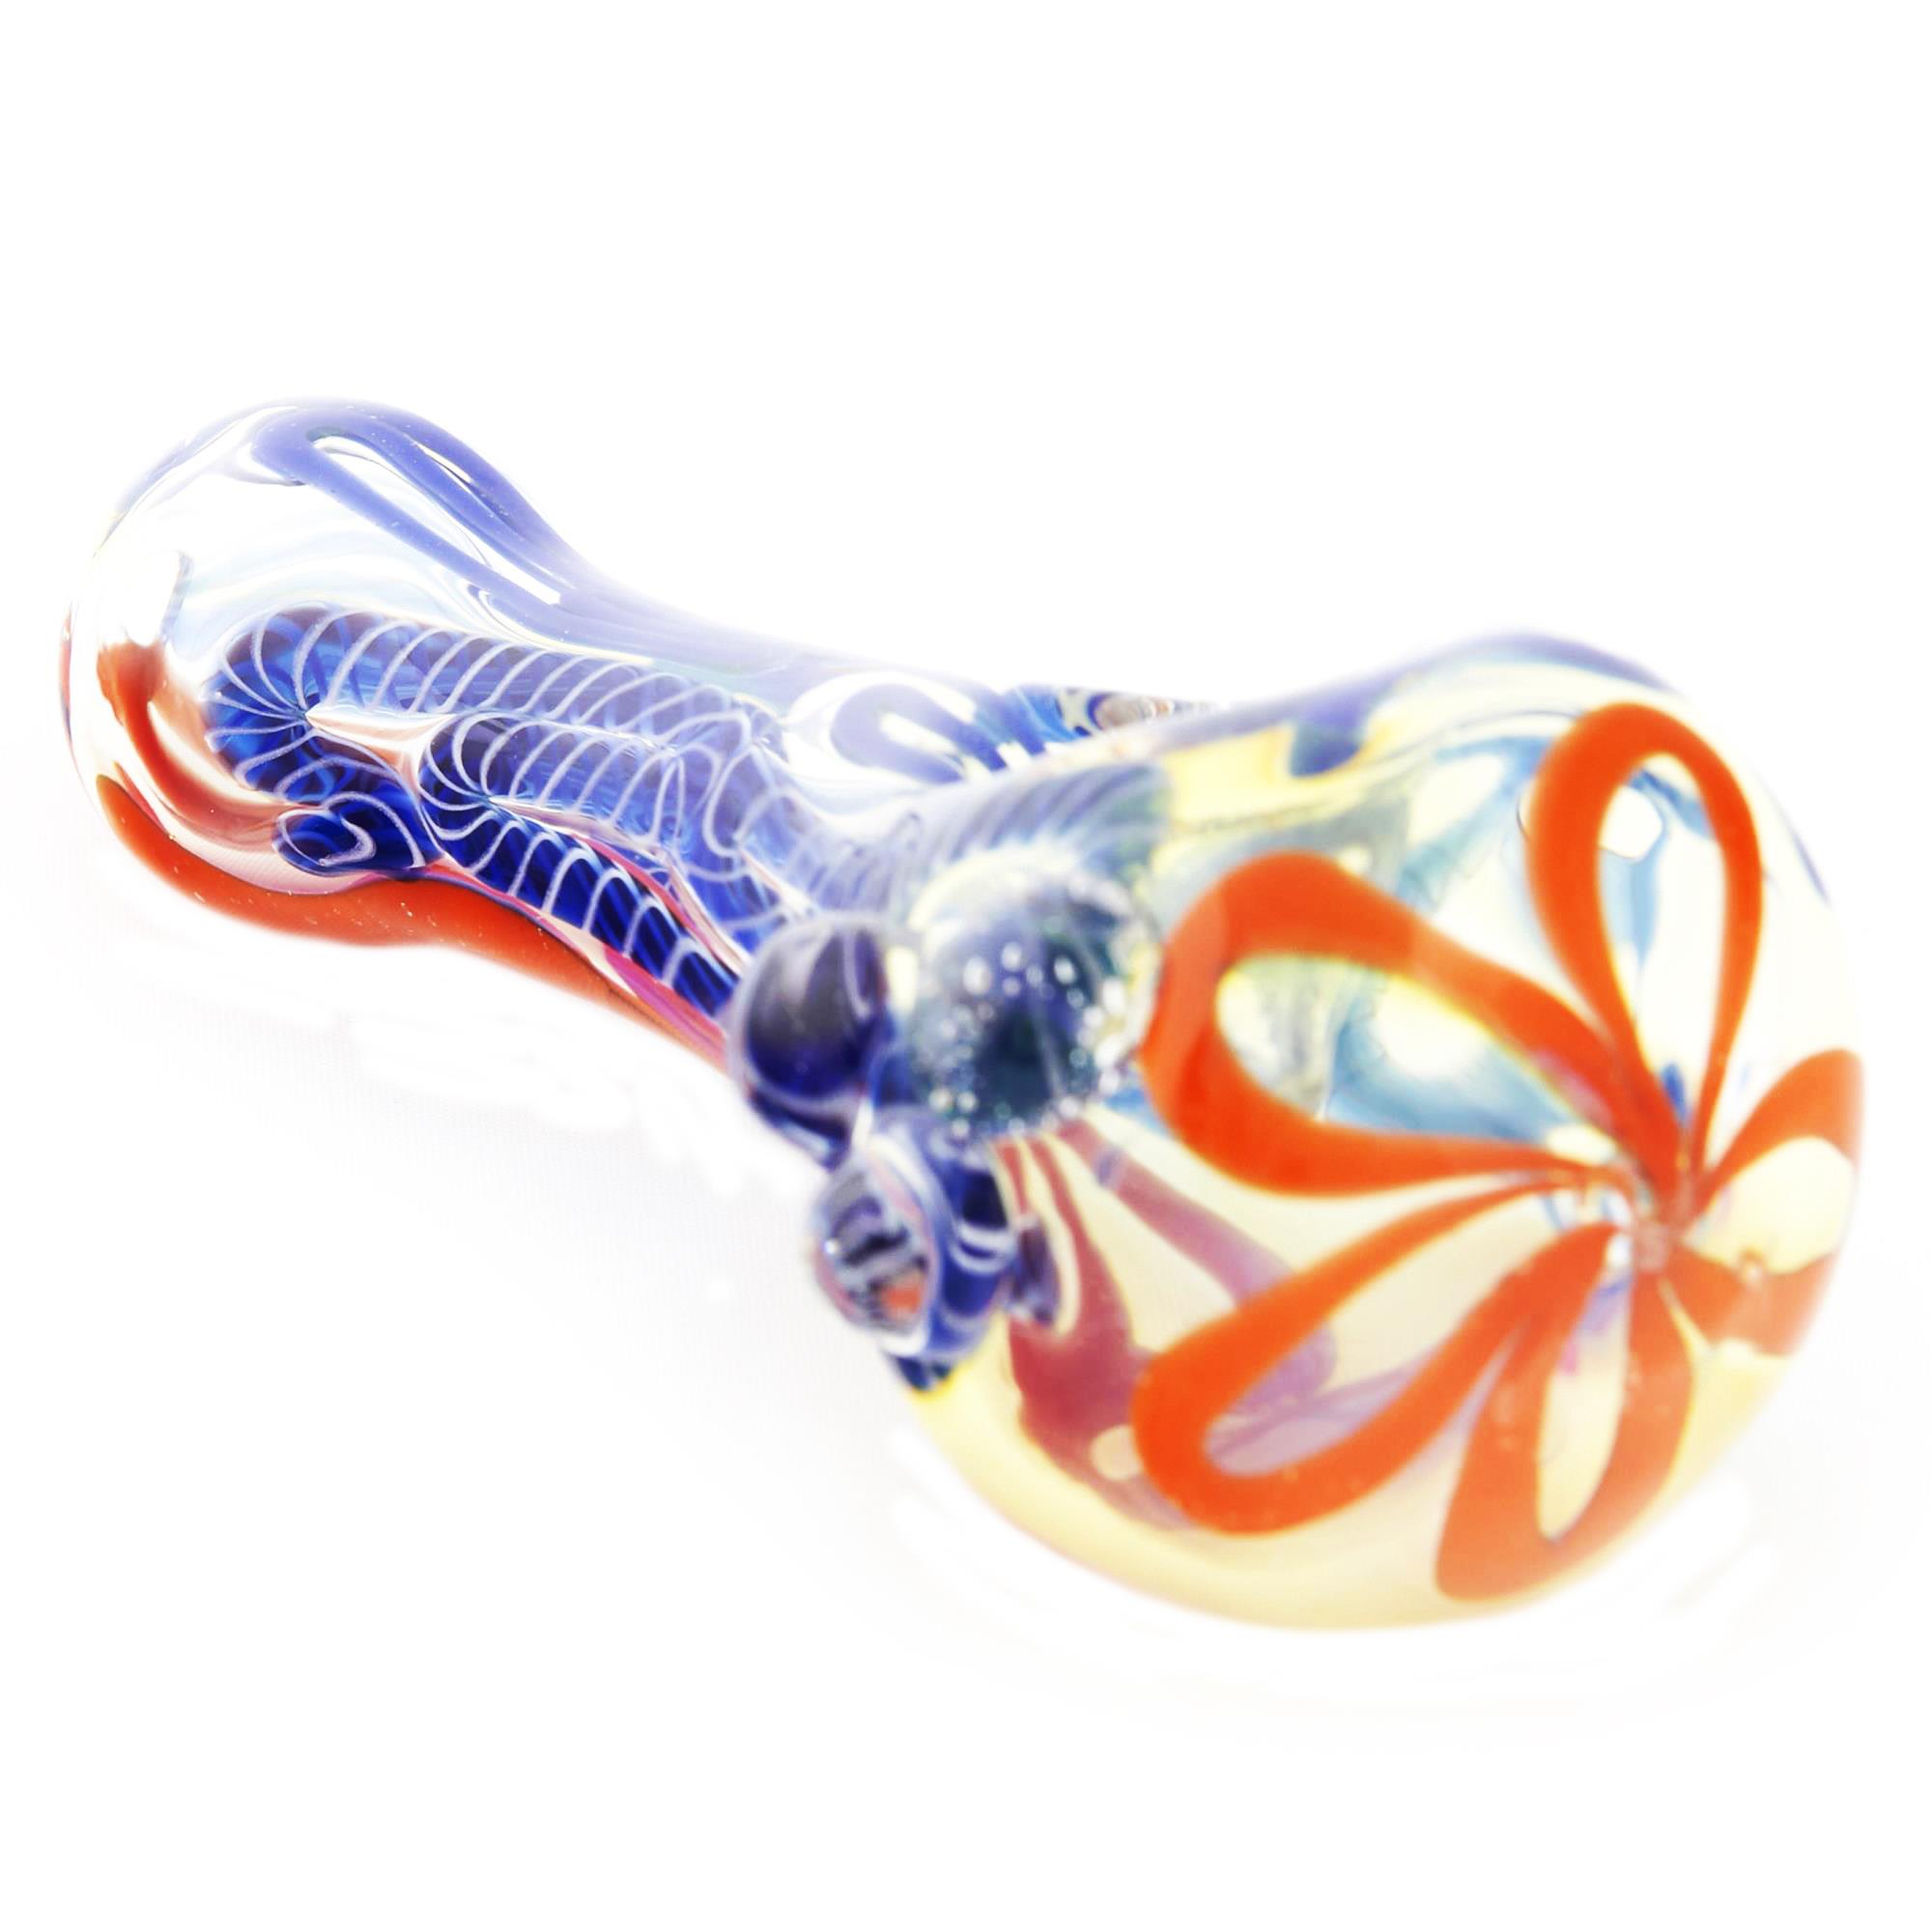 HIGH EXPECTATION SPOON PIPE